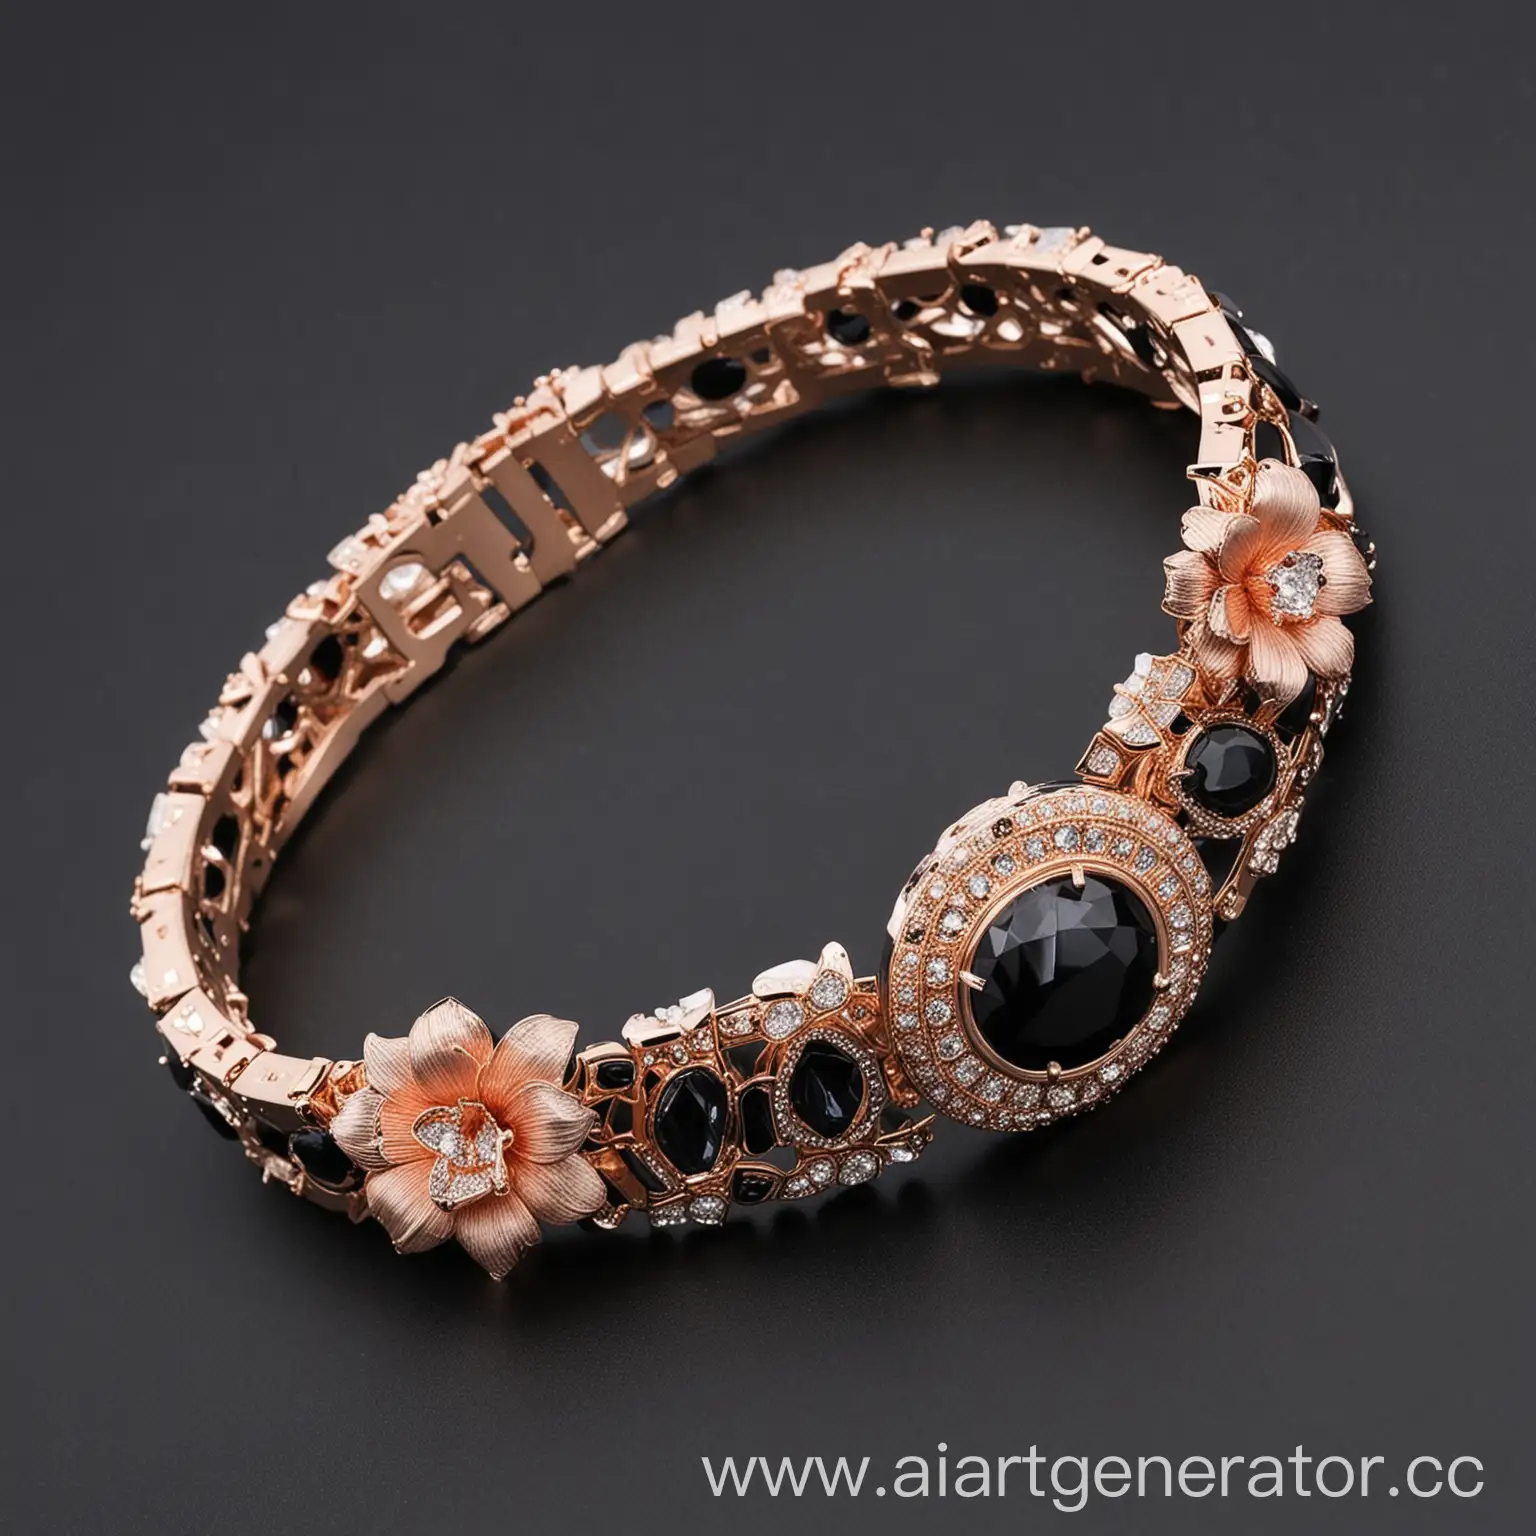 Futuristic-Cartier-Style-Bracelet-Decoration-with-Black-Stone-and-Rose-Flowers